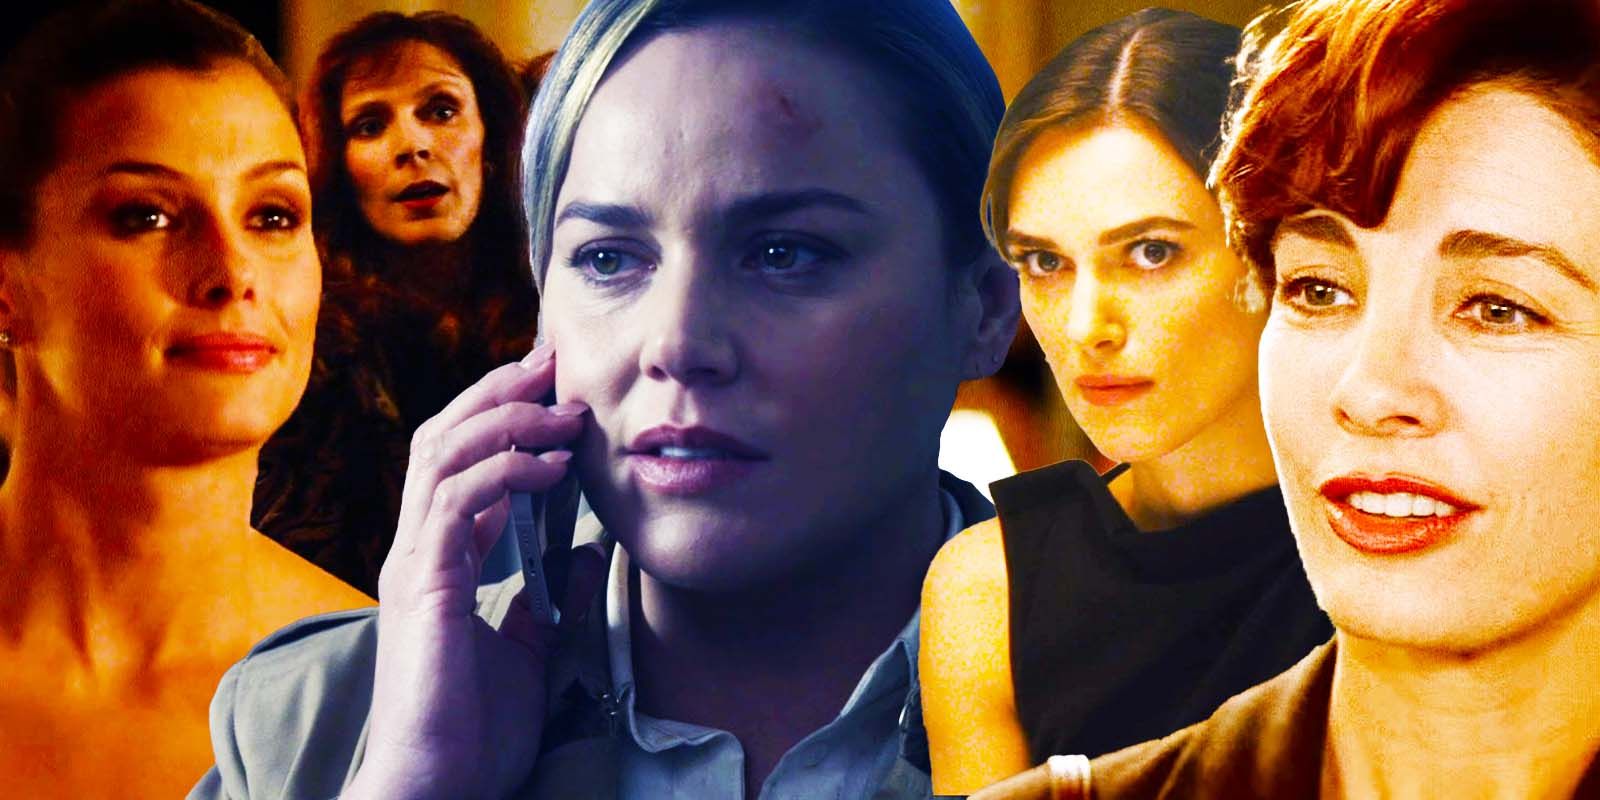 Bridget Moynahan as Cathy in The Sum of All Fears, Gates McFadden as Caroline Ryan in The Hunt for Red October, Abbie Cornish as Cathy Mueller in Tom Clancy's Jack Ryan, Keira Knightley as Cathy in Jack Ryan Shadow Recruit and Anne Archer as Cathy in Clear and Present Danger